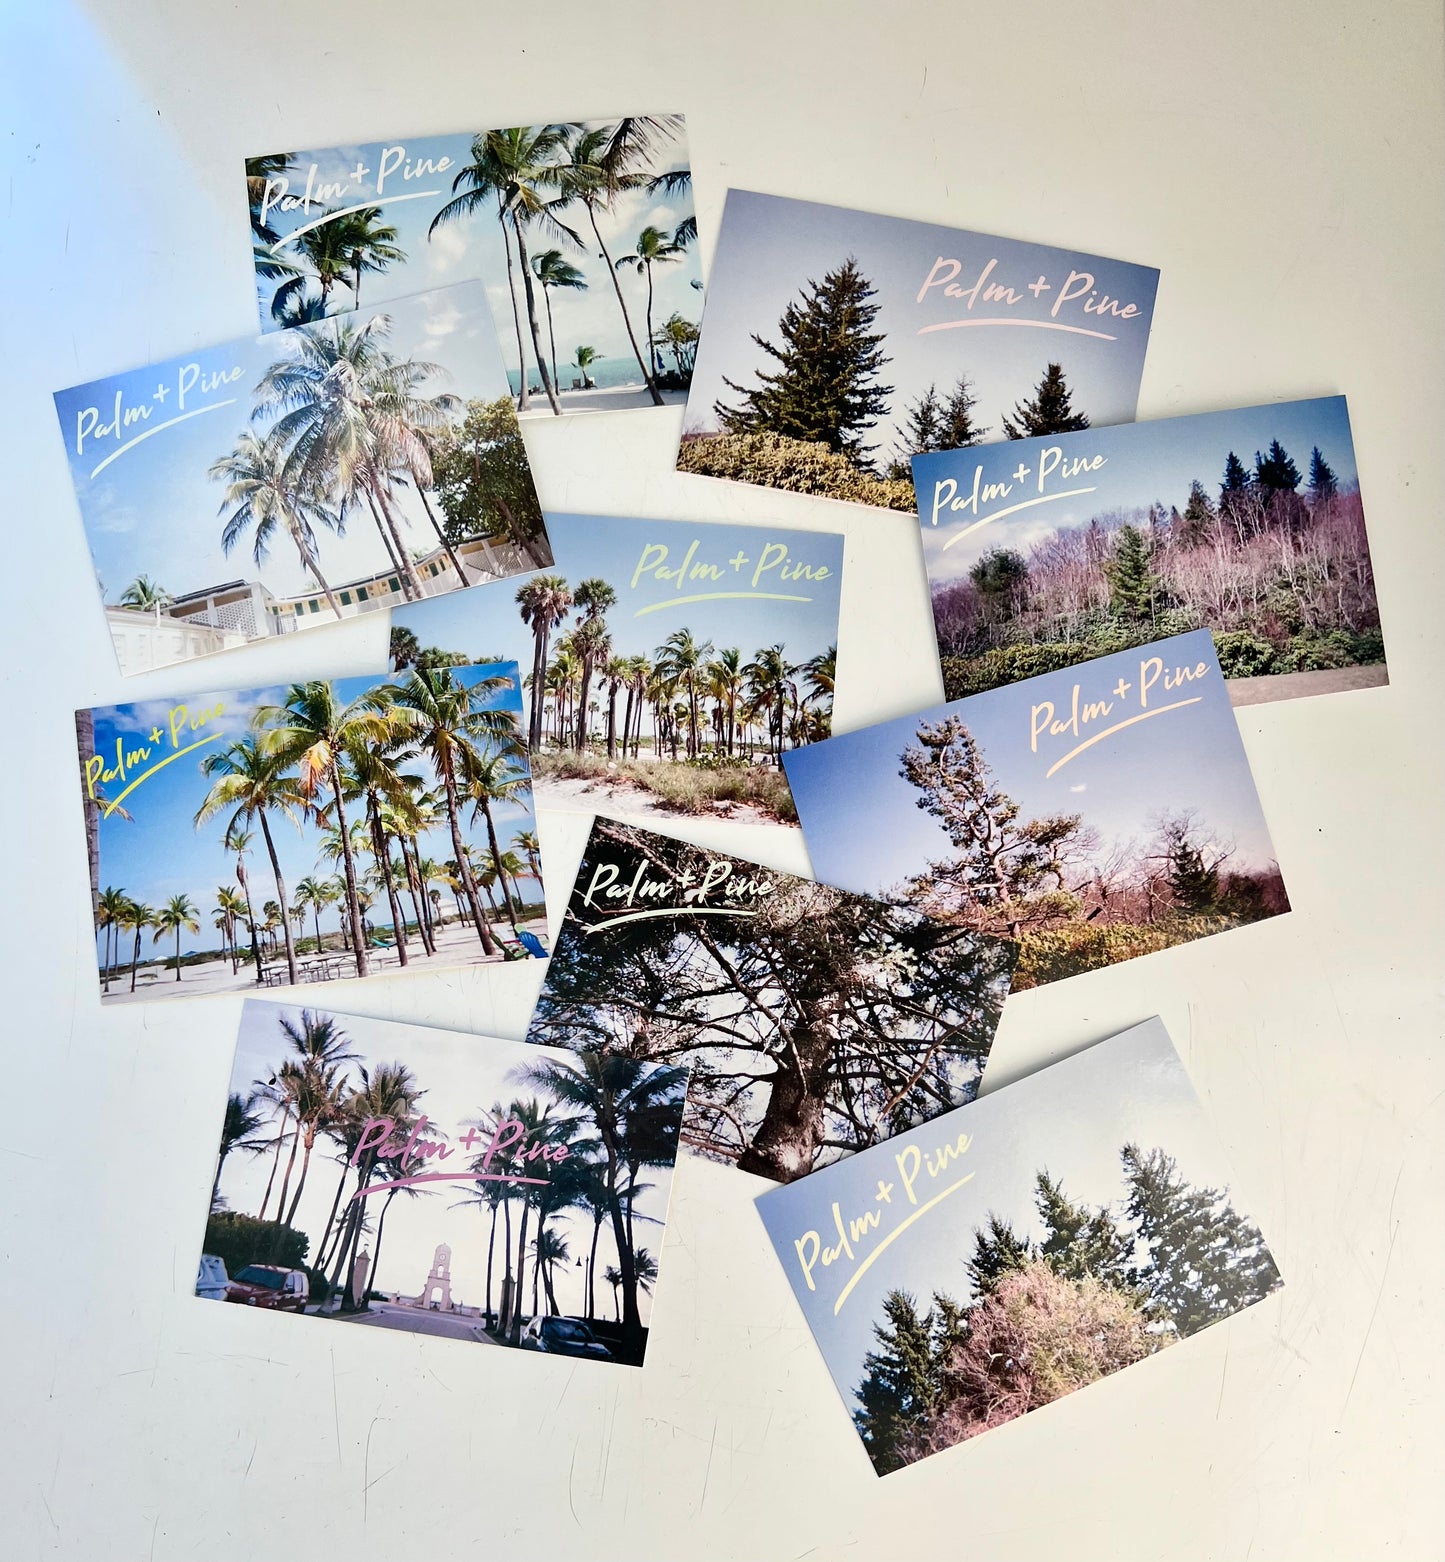 "PALM" AND "PINE" POSTCARDS